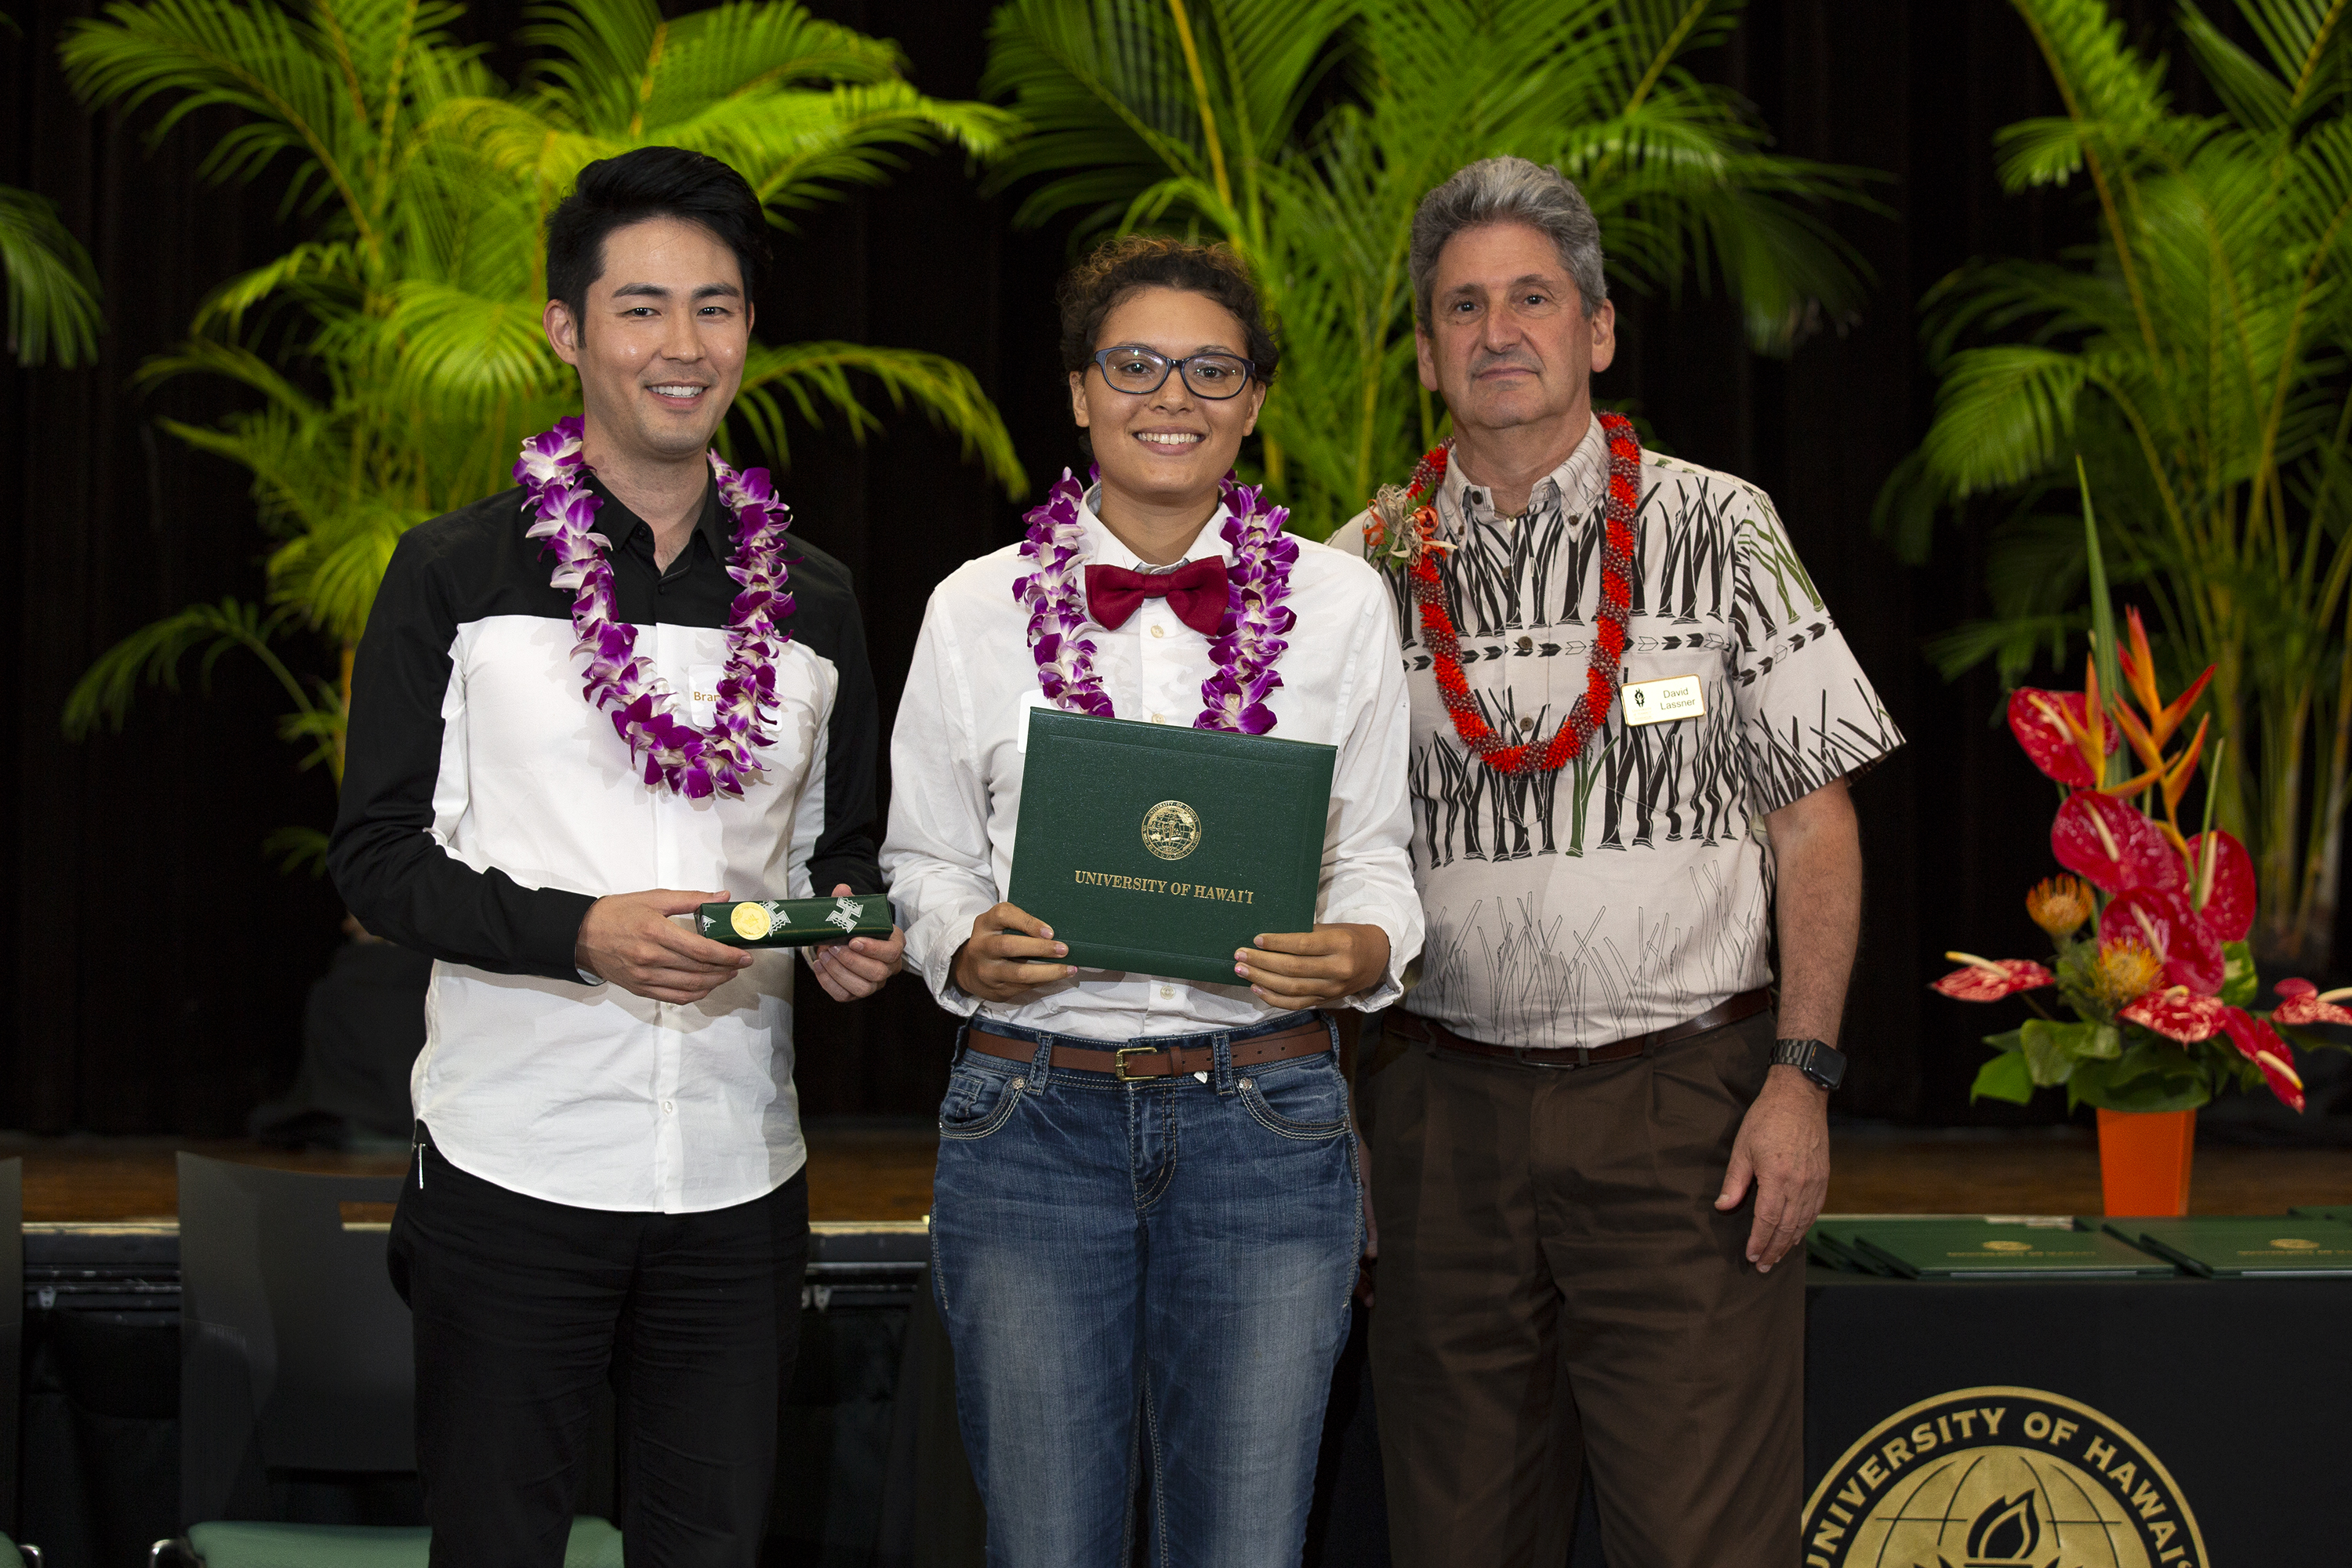 Emma Lake (center) and other Regent Scholars were honored at a July 19 ceremony. Also on hand were Regent Brandon Marc Higa (left) and UH President David Lassner (Right)